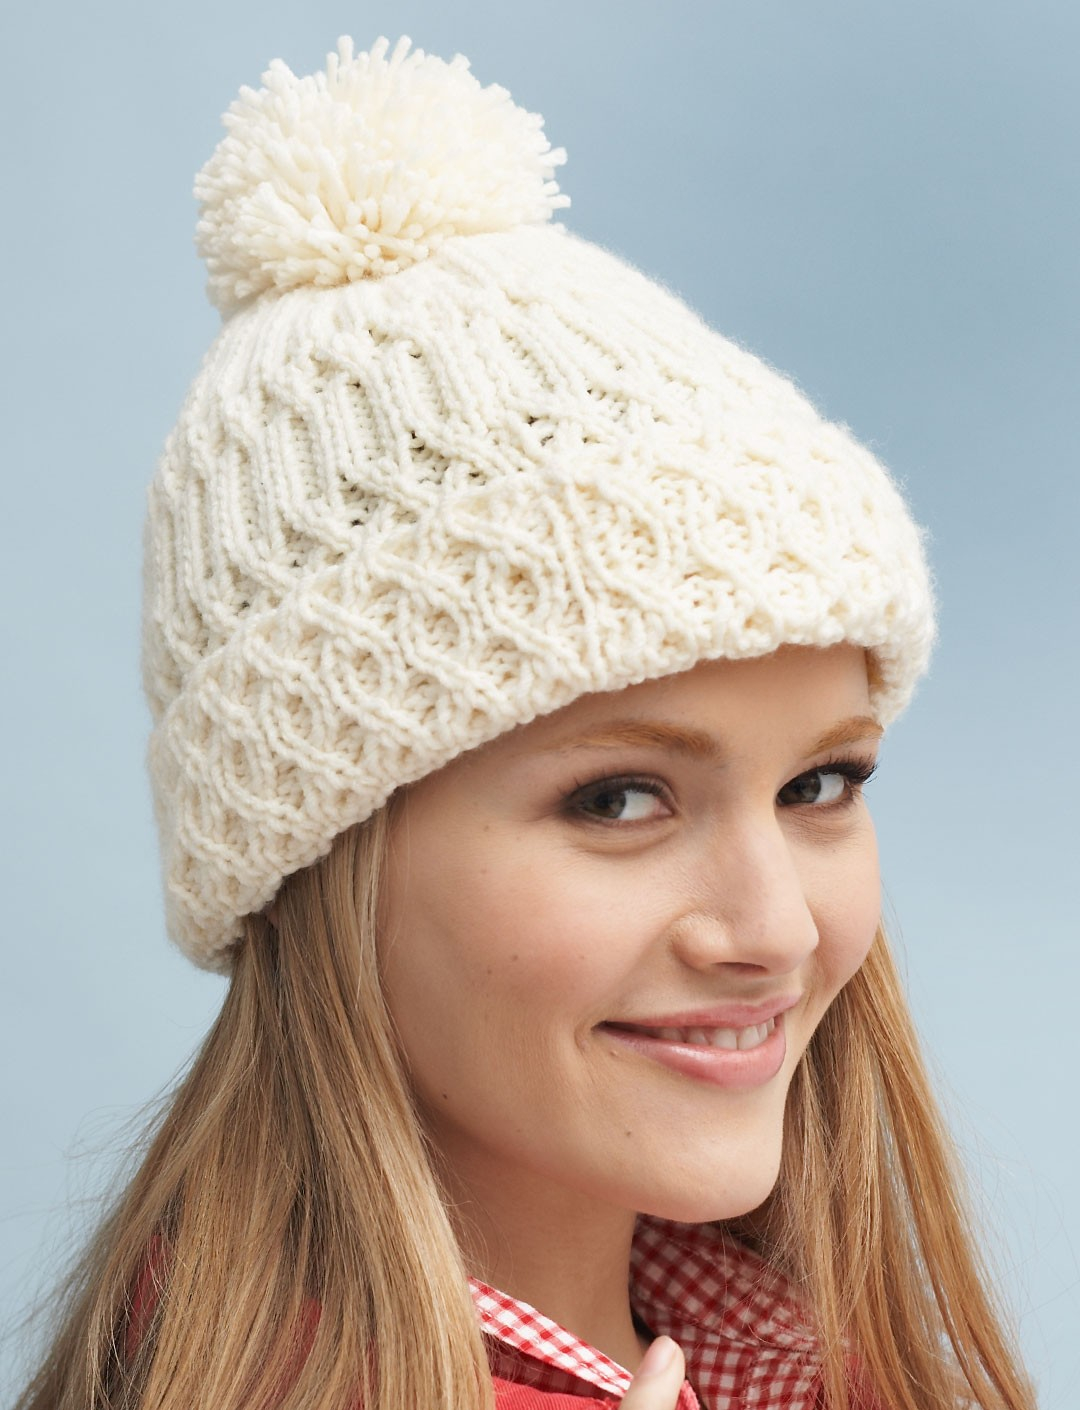 Hat Knitting Patterns The Easy Hat Knitting Patterns Crochet And Knitting Patterns 2019